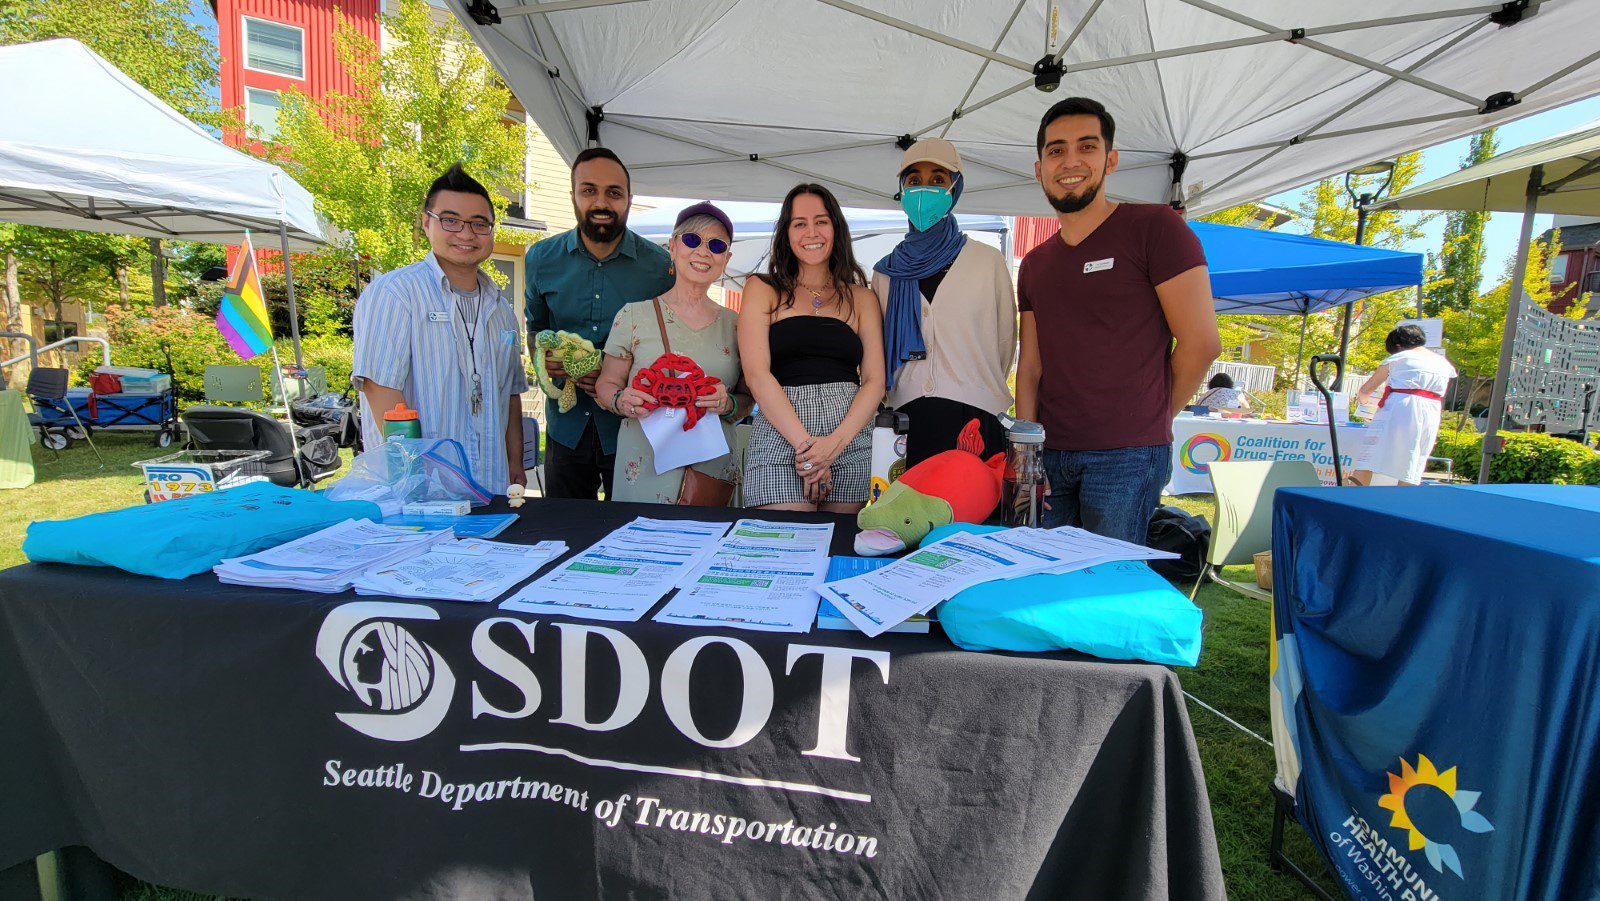 A group of 6 SDOT staff smile while standing behind an SDOT table at a community event.  